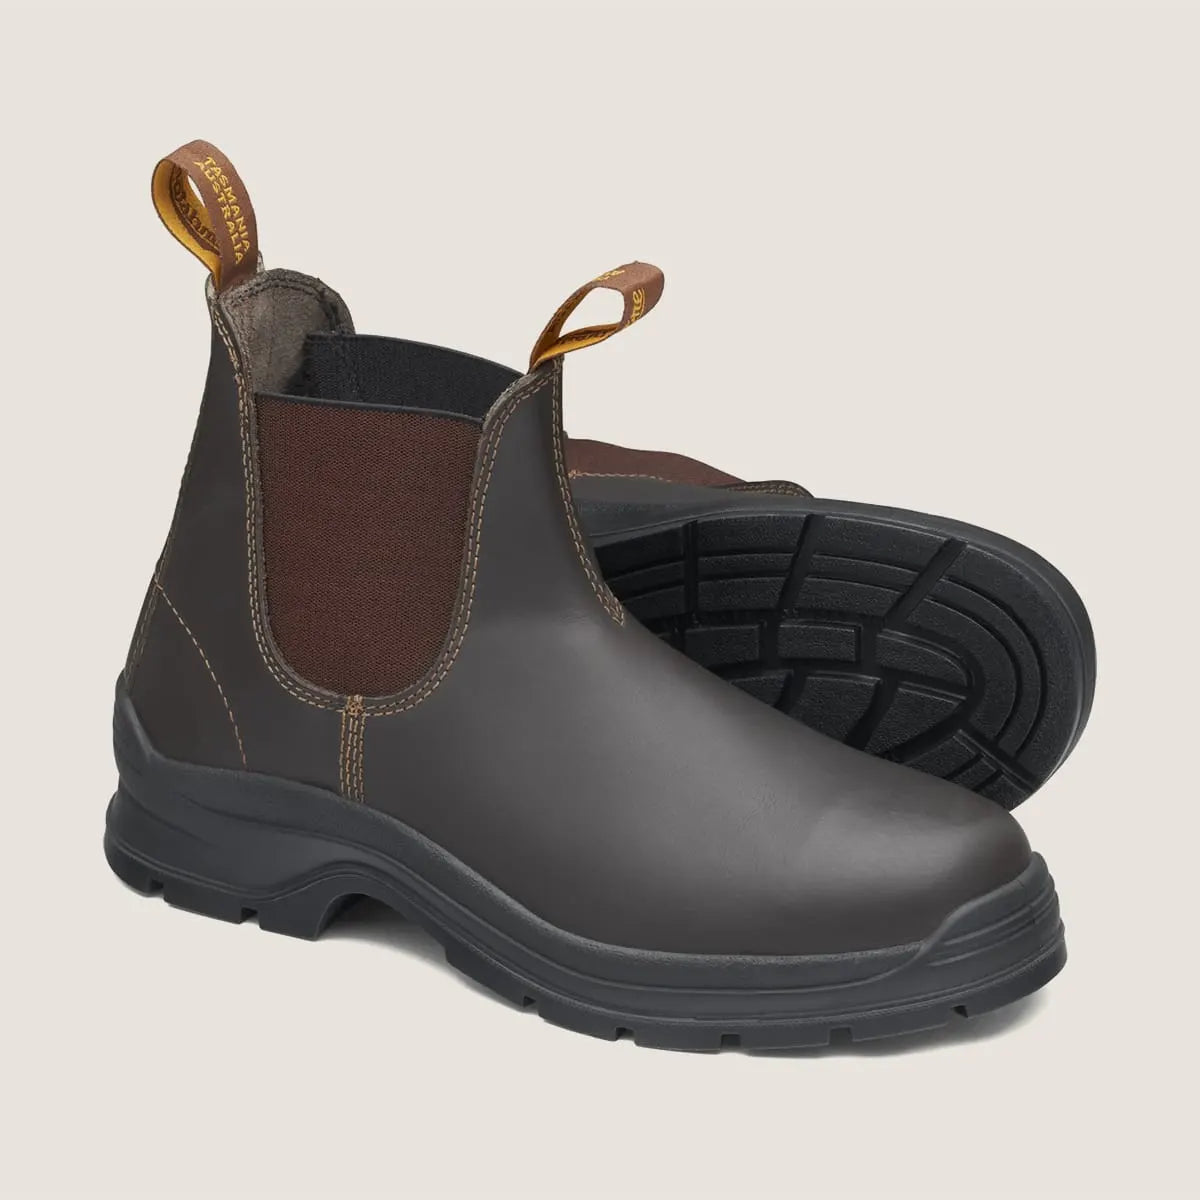 Blundstone 405 Non Safety Elastic Sided Work Boots